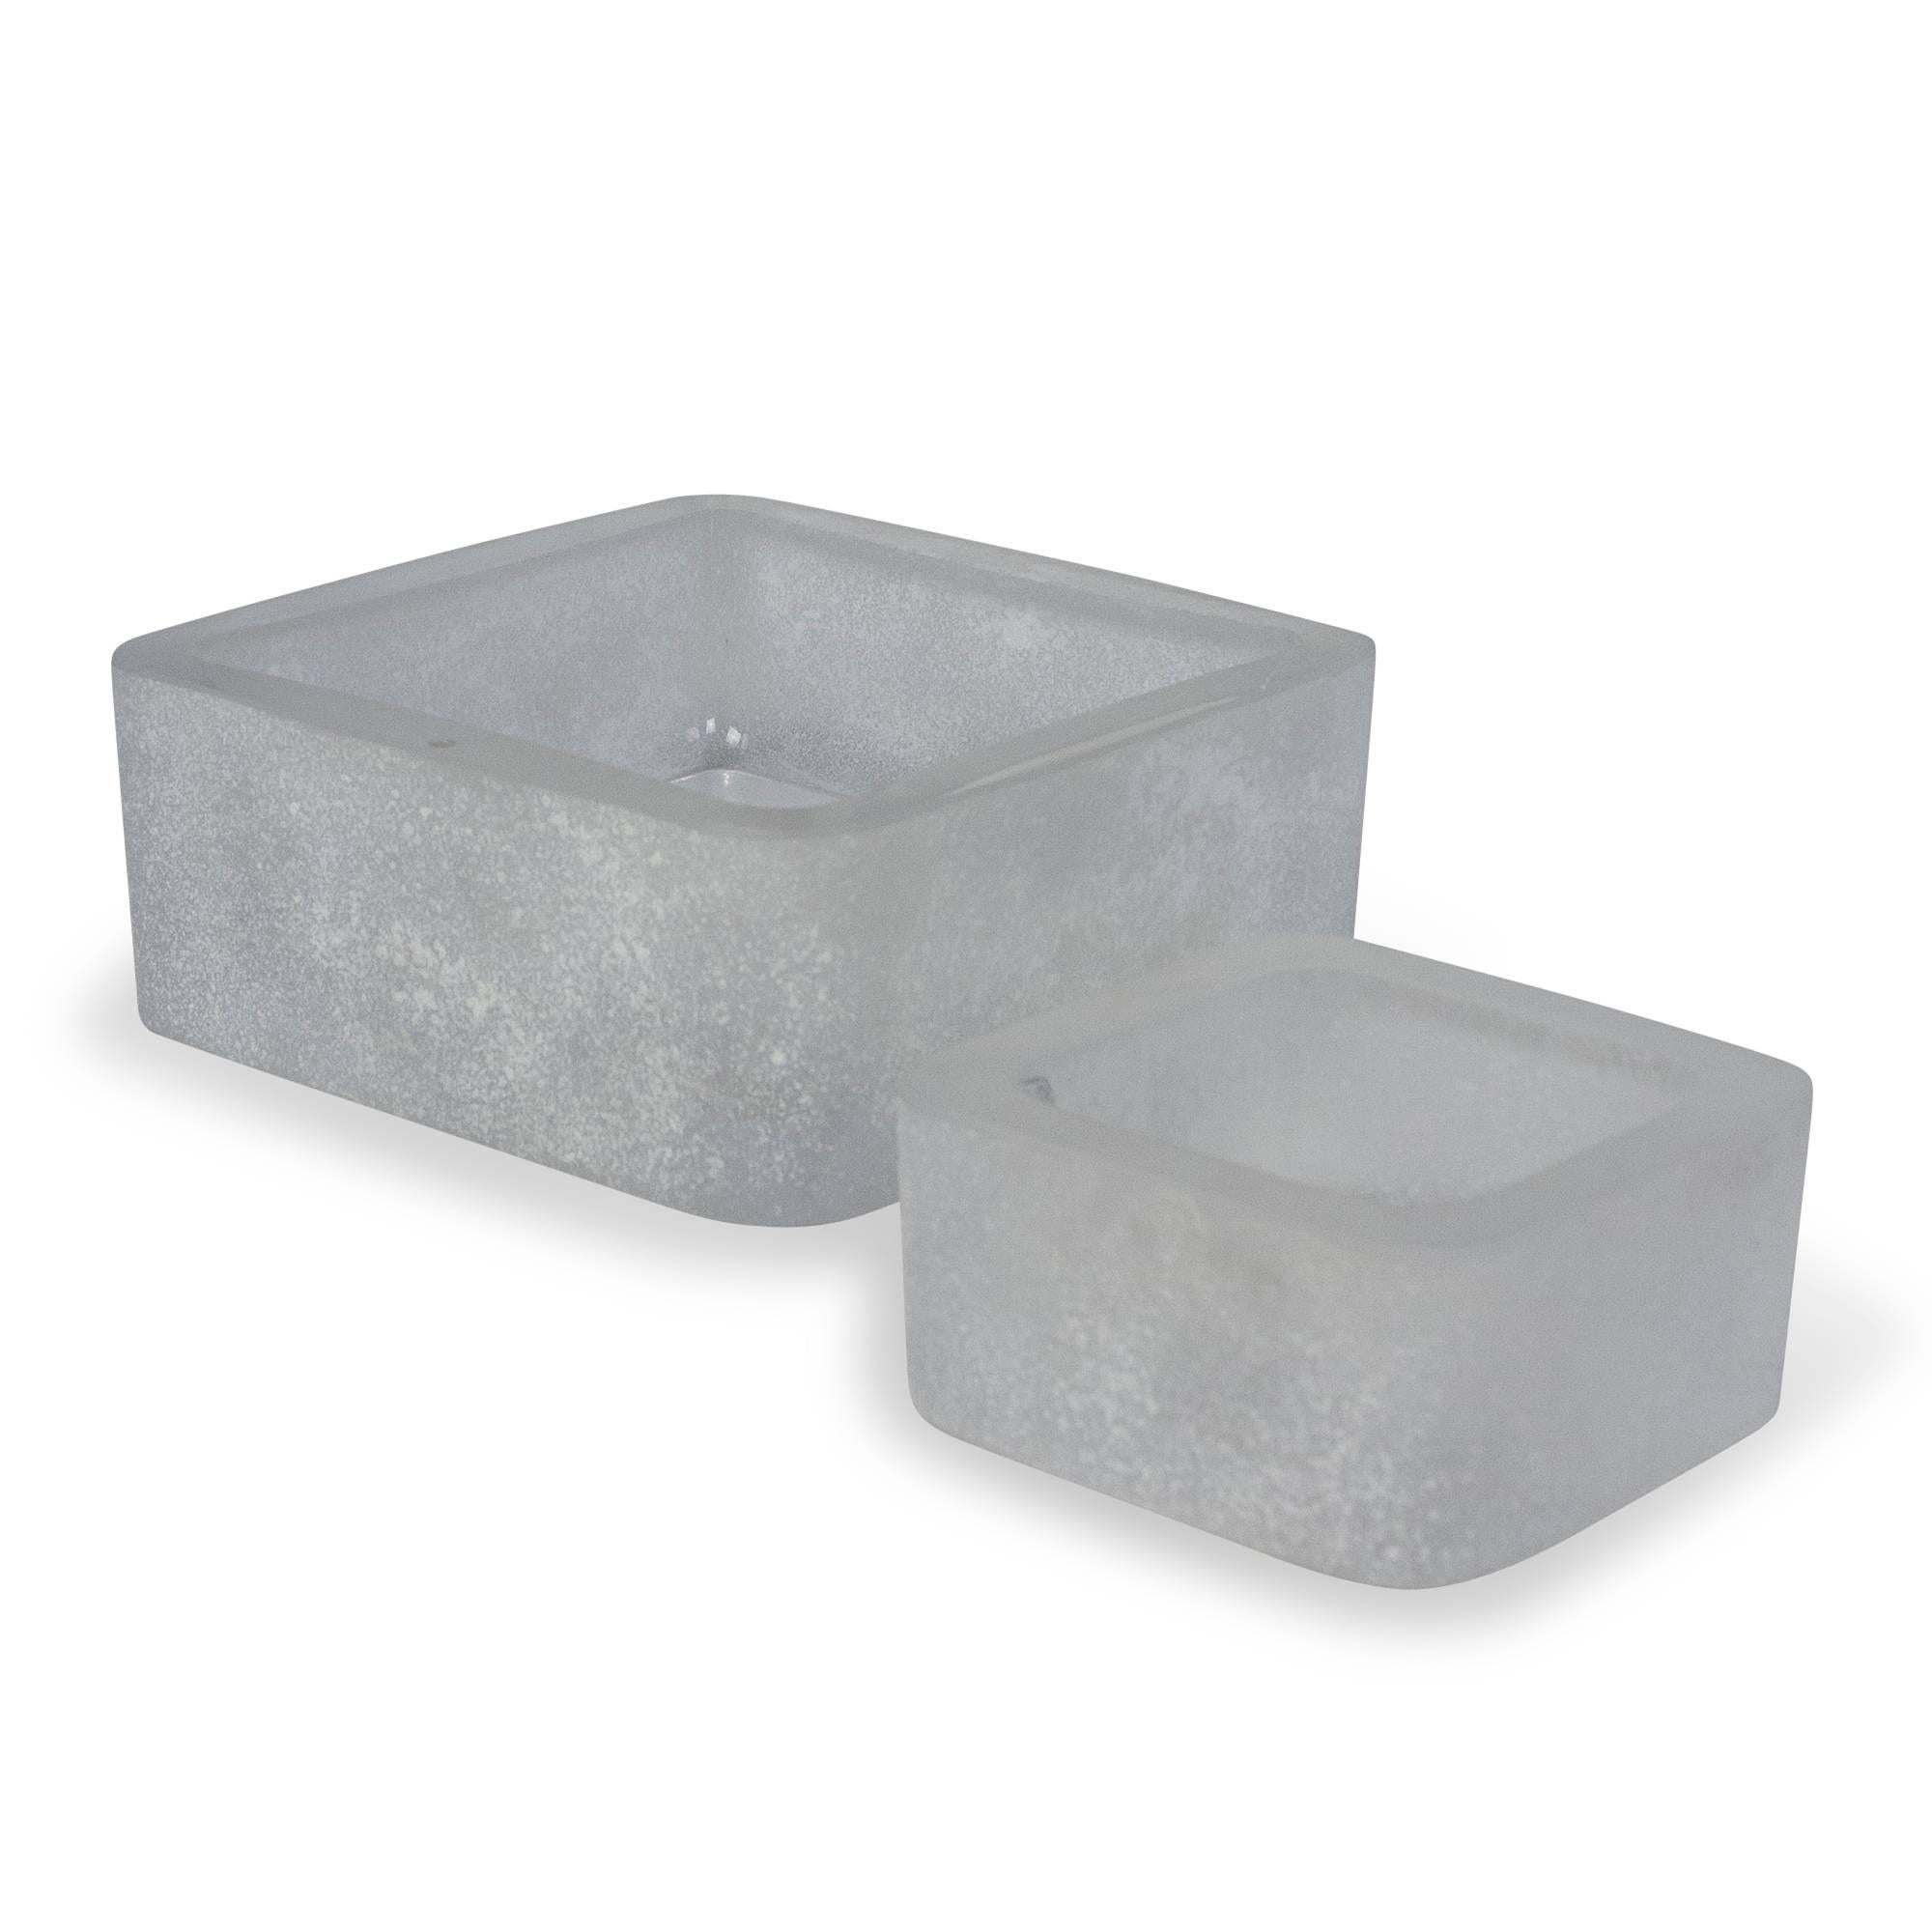 Two frosted glass dishes, square:
 On left: Square white frosted glass dish, with textured sides and insides, by Seguso, Italian 1970s. 2 3/4 high, 7 in square. (Item #2078). 
On right: Square white frosted glass dish, with textured sides, insides